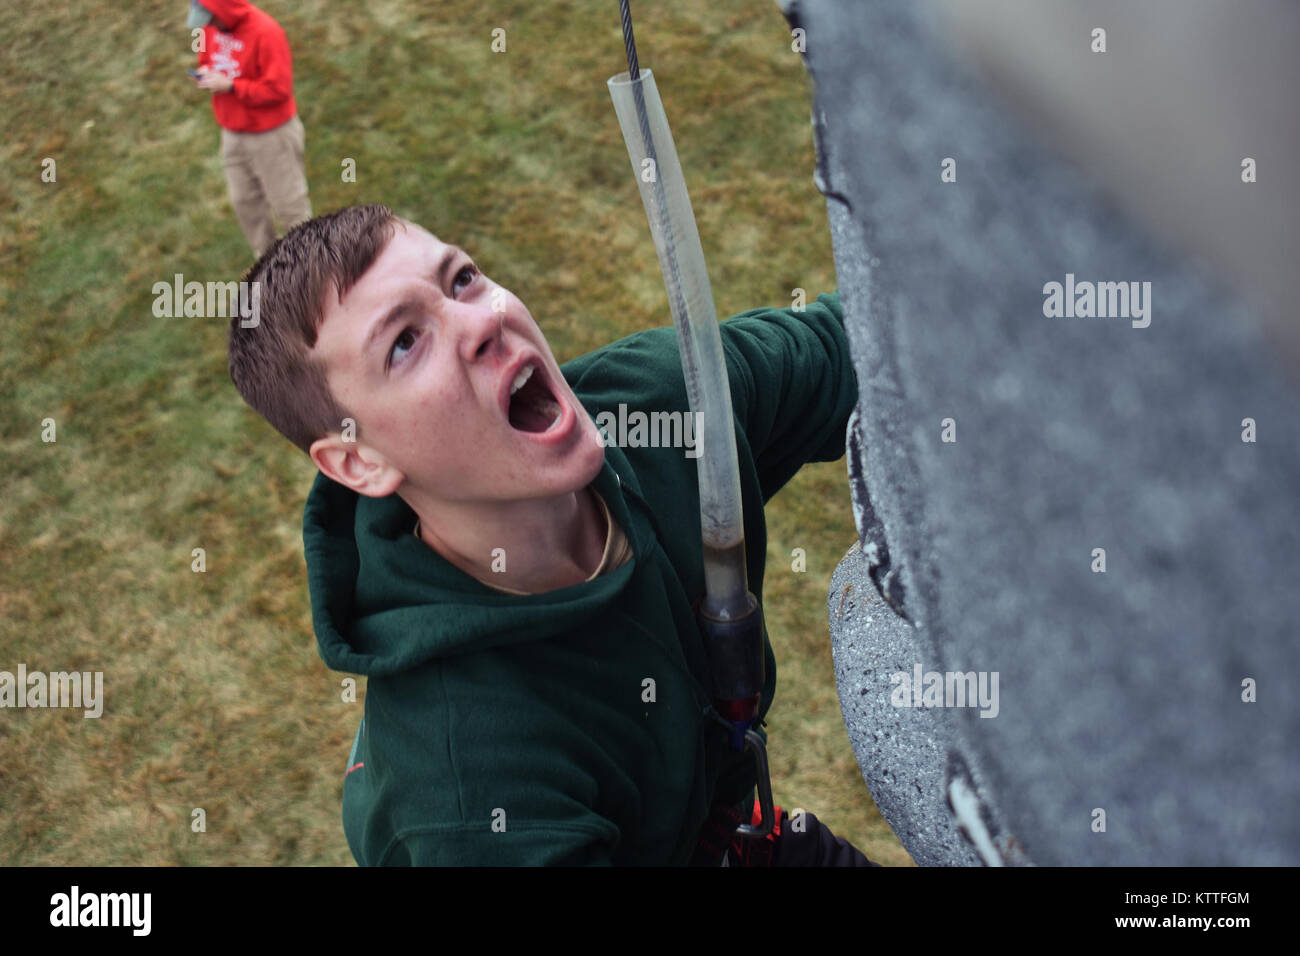 A Boy Scout climbs up a rock wall at the New York Army National Guard’s (NYARNG) Queensbury Armory, Queensbury, N.Y., Sept. 30, 2017.The boy scouts, on their annual camporee were learning about the NYARNG, and were able to participate in events like pulling a humvee, pull-up contests, an electronic range, and racing up a rock wall. (N.Y. Army National Guard photo by Pfc. Andrew Valenza) Stock Photo